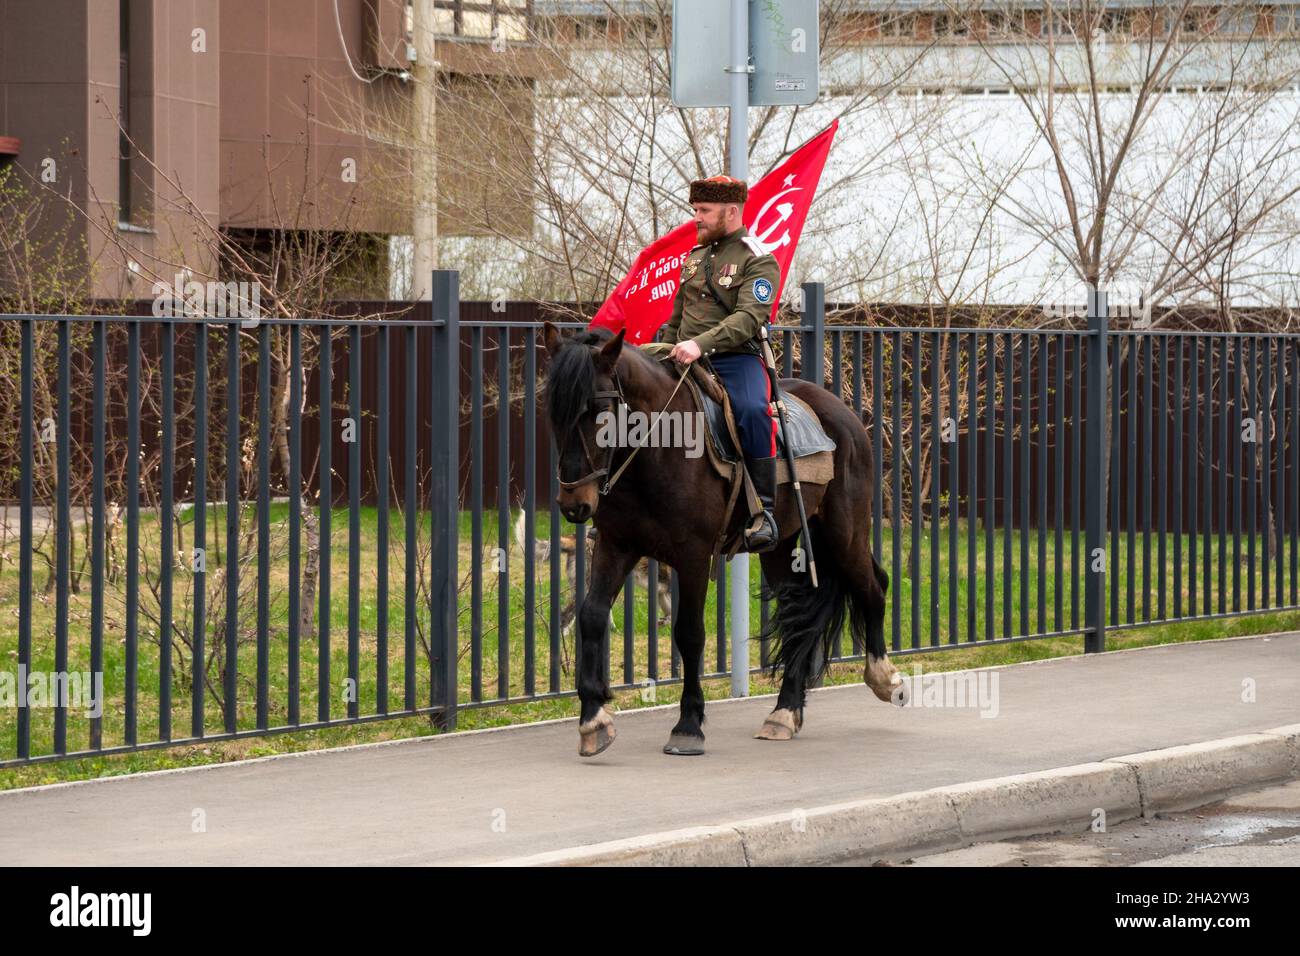 A Cossack with the regiment's banner rides a brown horse along the sidewalk along a metal fence in a spring city. Stock Photo